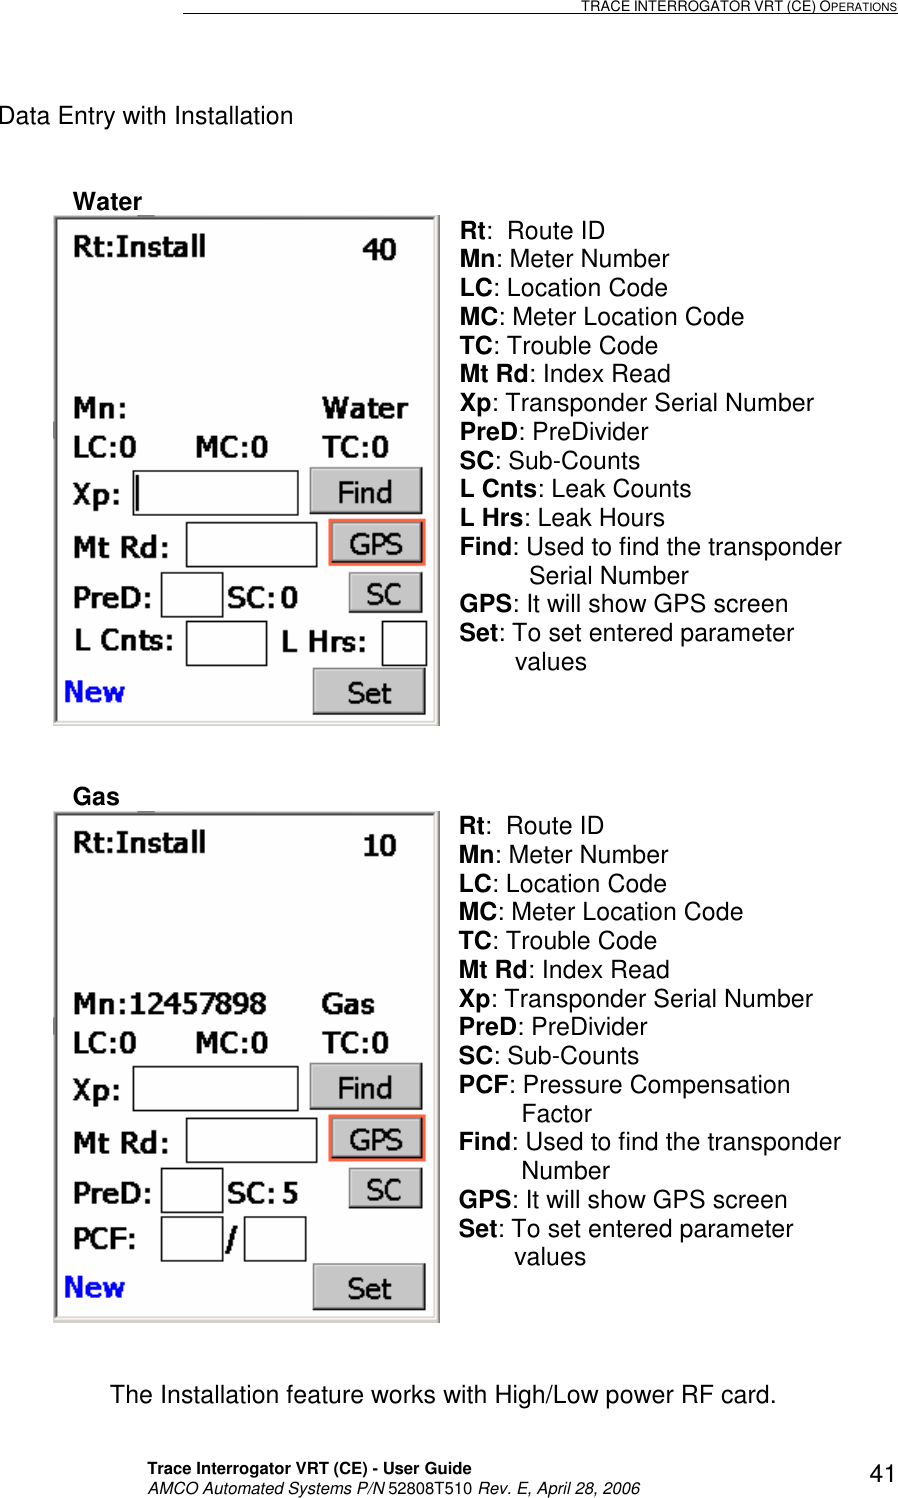                                                                                                                              TRACE INTERROGATOR VRT (CE) OPERATIONS    Trace Interrogator VRT (CE) - User Guide   AMCO Automated Systems P/N 52808T510 Rev. E, April 28, 2006 41Data Entry with Installation    Water  Rt:  Route ID Mn: Meter Number LC: Location Code MC: Meter Location Code TC: Trouble Code Mt Rd: Index Read Xp: Transponder Serial Number PreD: PreDivider SC: Sub-Counts L Cnts: Leak Counts L Hrs: Leak Hours Find: Used to find the transponder             Serial Number GPS: It will show GPS screen Set: To set entered parameter          values  Gas   Rt:  Route ID Mn: Meter Number LC: Location Code MC: Meter Location Code TC: Trouble Code Mt Rd: Index Read Xp: Transponder Serial Number PreD: PreDivider SC: Sub-Counts PCF: Pressure Compensation             Factor Find: Used to find the transponder            Number GPS: It will show GPS screen Set: To set entered parameter           values    The Installation feature works with High/Low power RF card. 